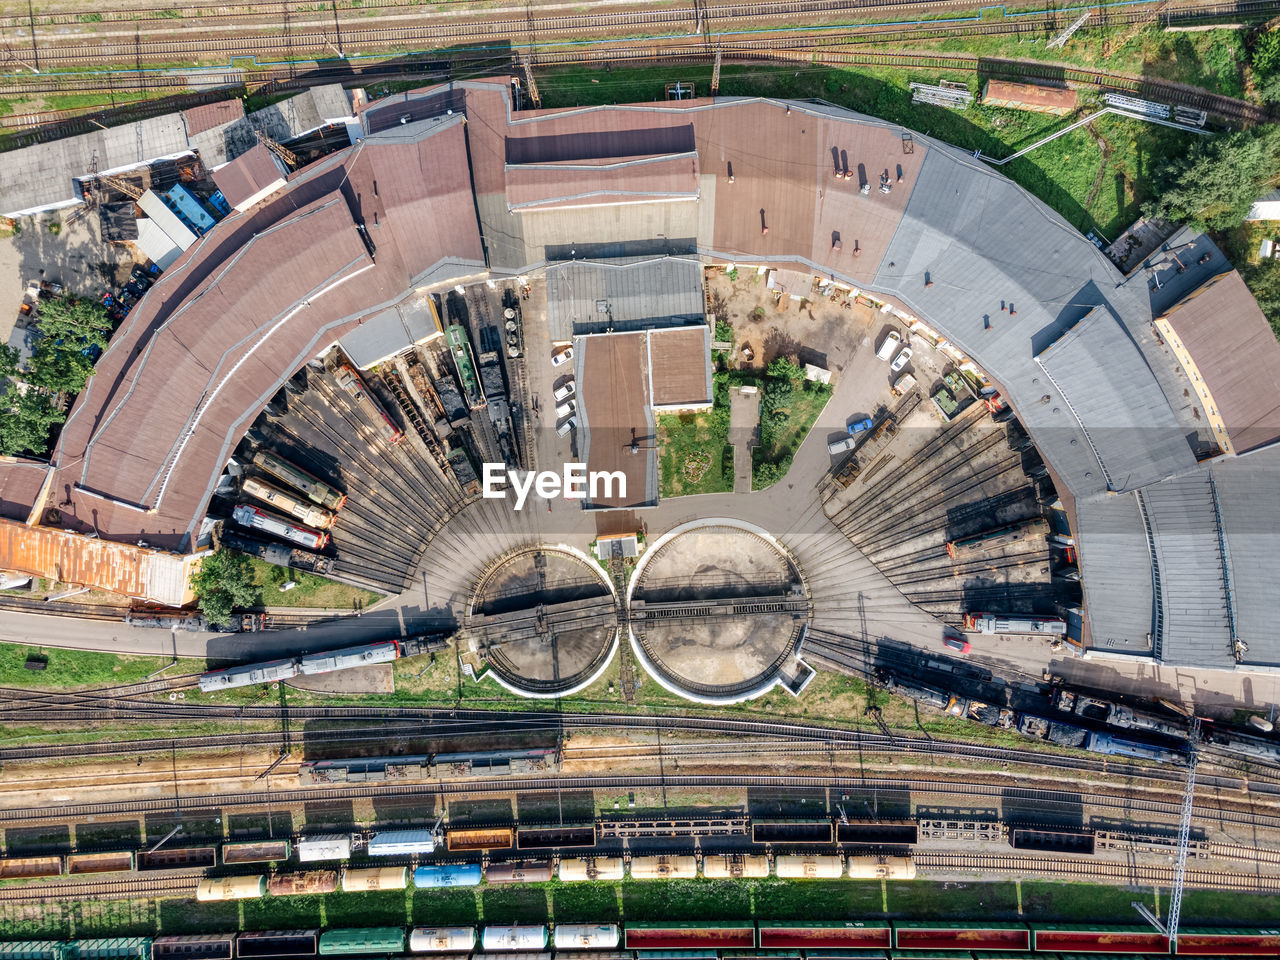 Aerial photo of semicircular railway depot. near round railway turntable for turning wagons.